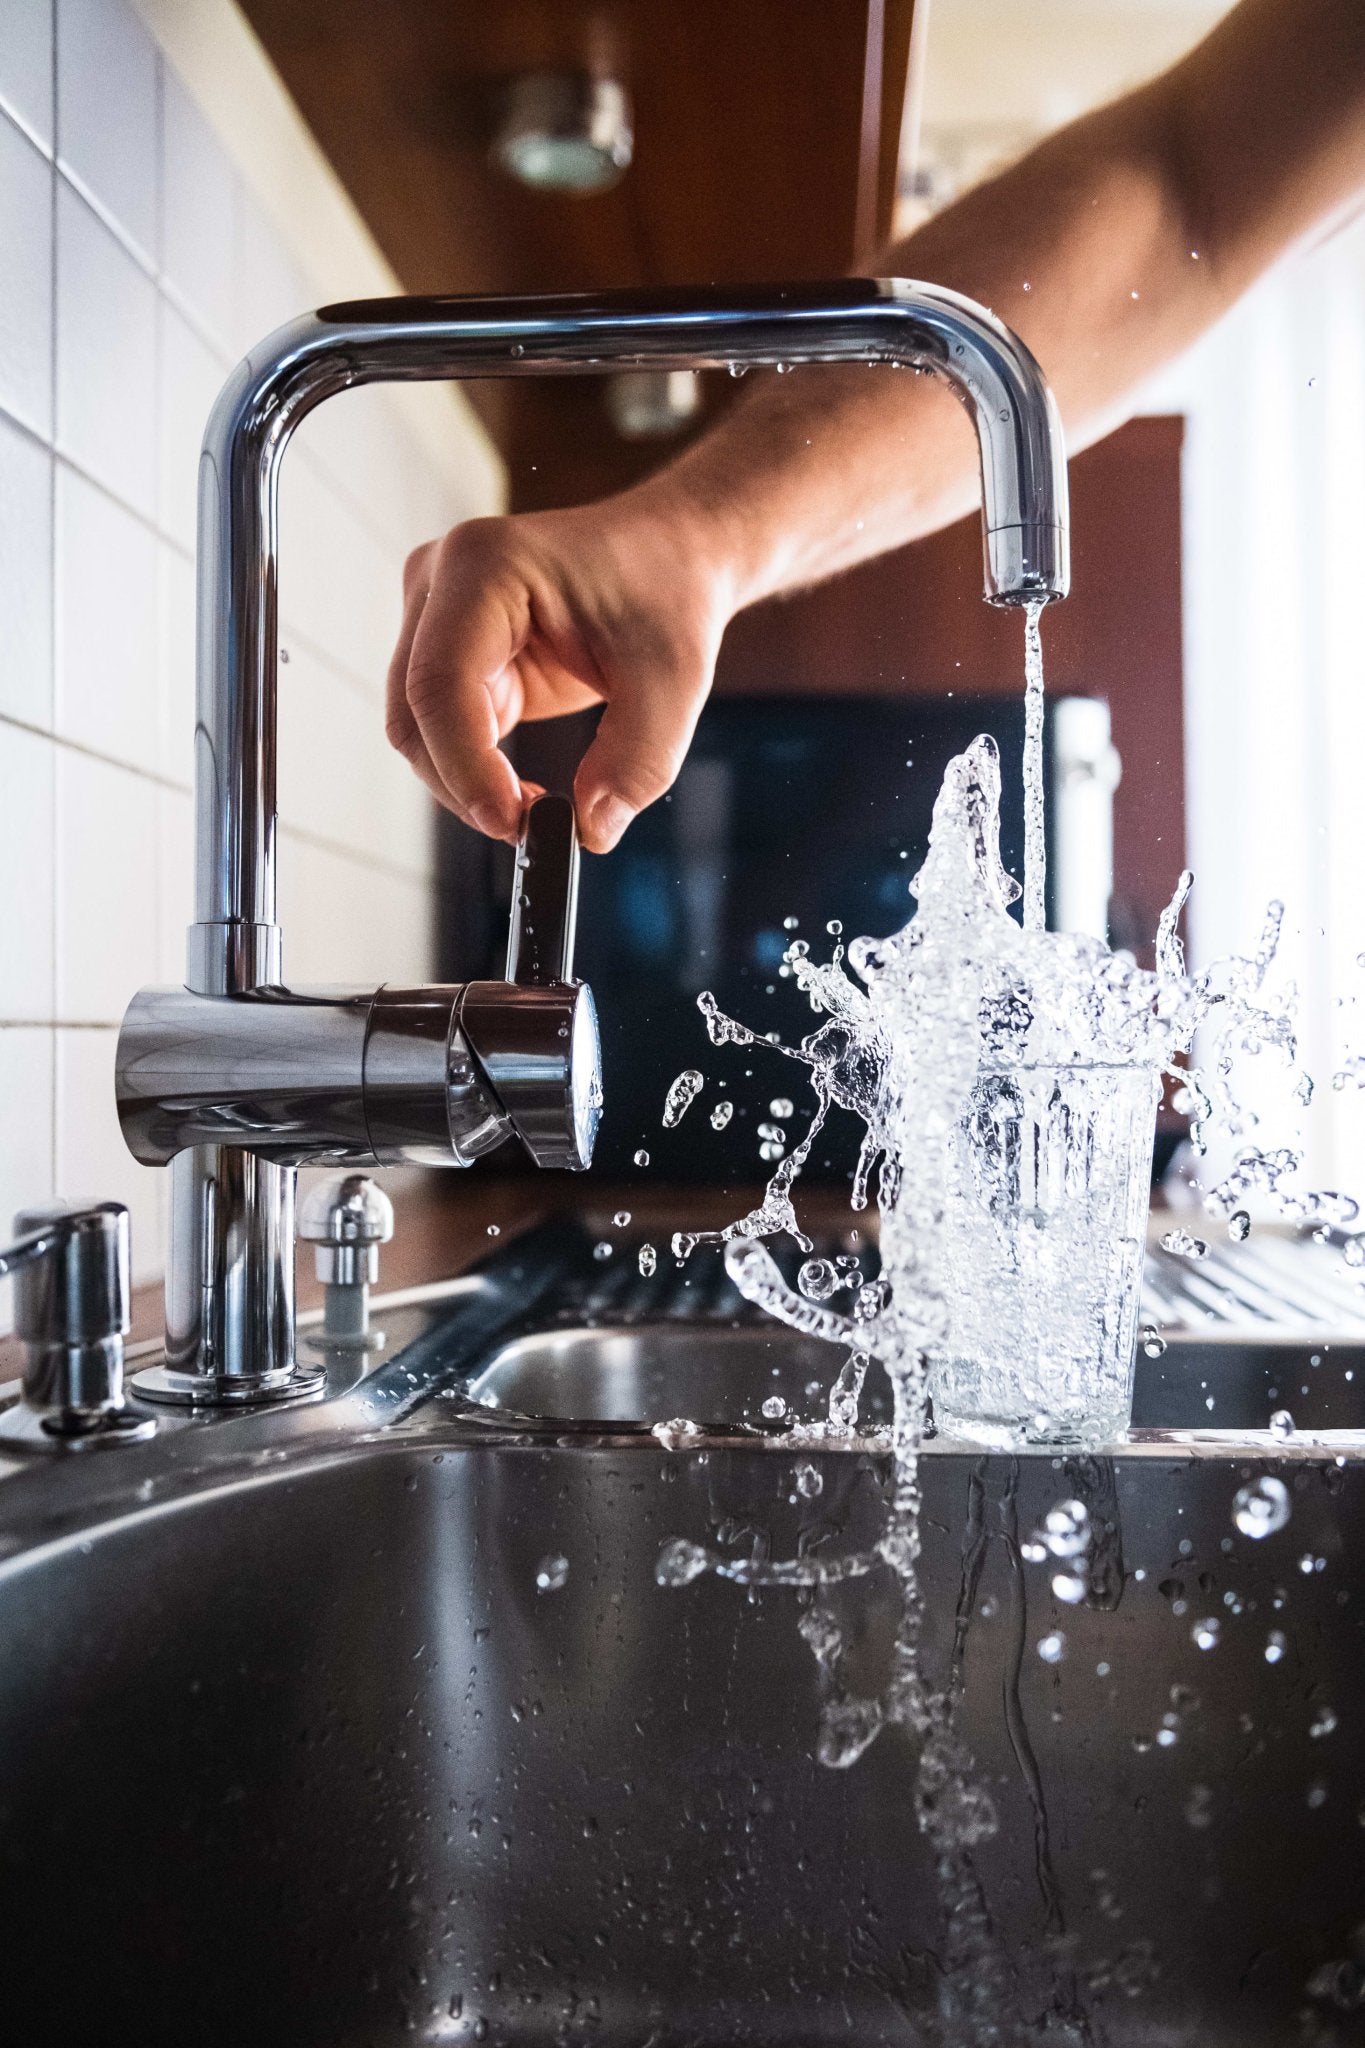 Thirsty for Answers? Find Out if Your Water is Hurting You - L'eau Mor